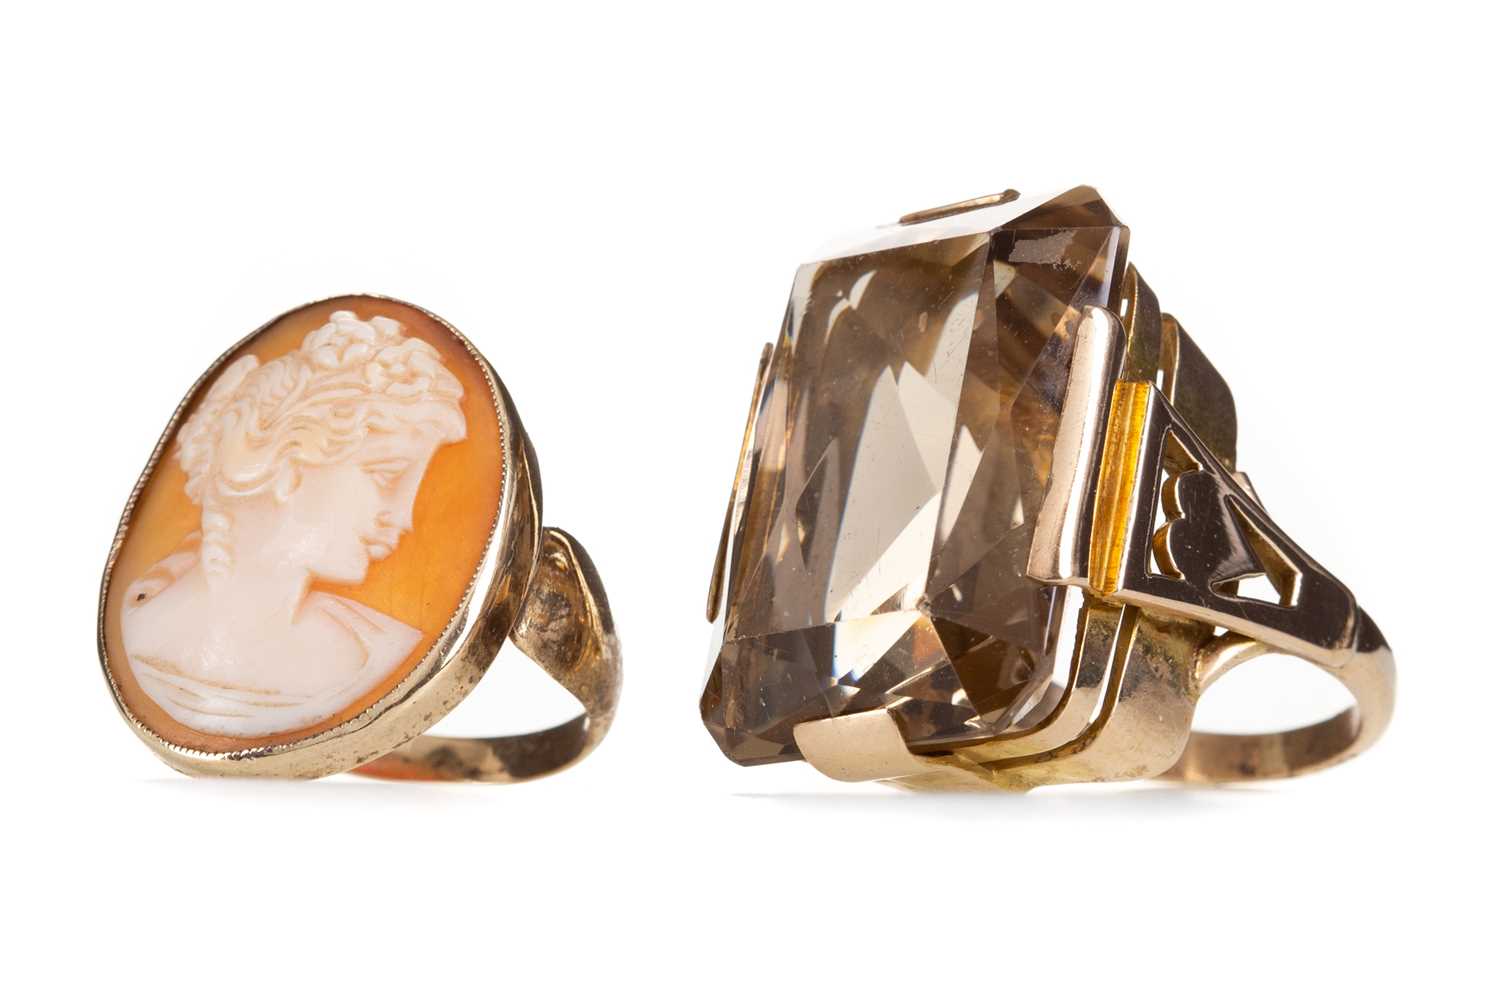 Lot 452 - A LARGE SMOKY QUARTZ RING AND A CAMEO RING